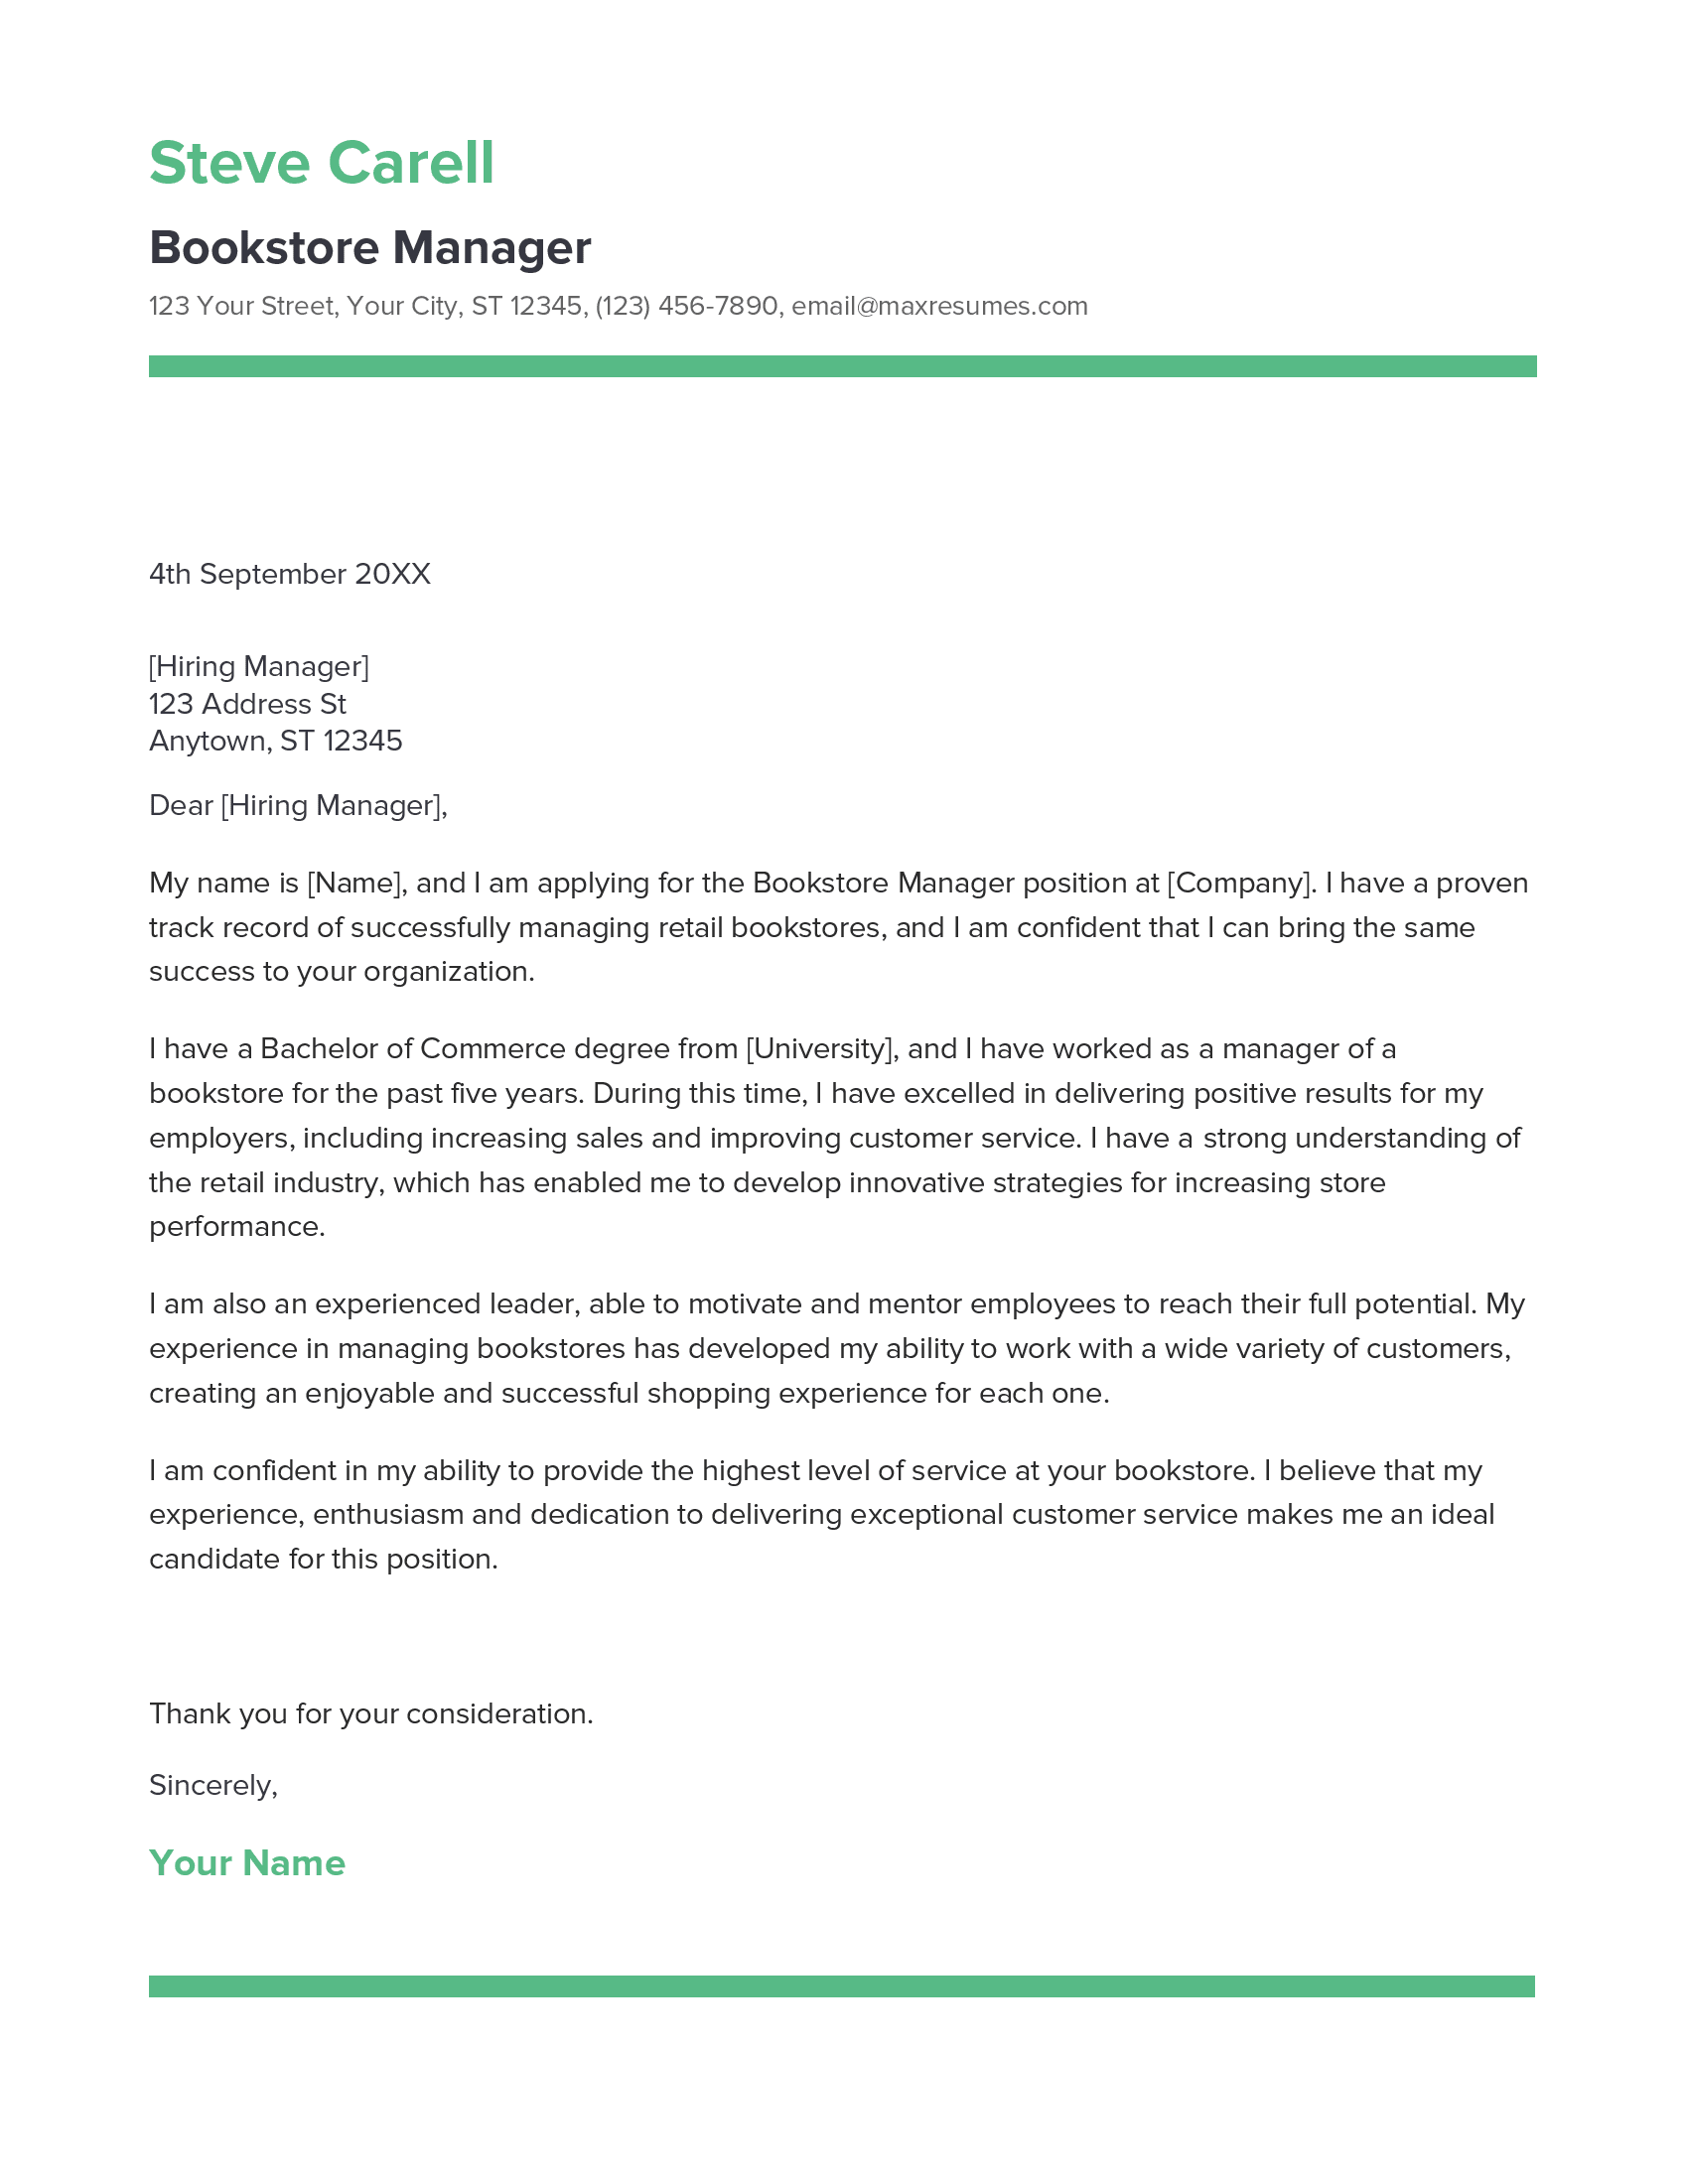 Bookstore Manager Cover Letter Example